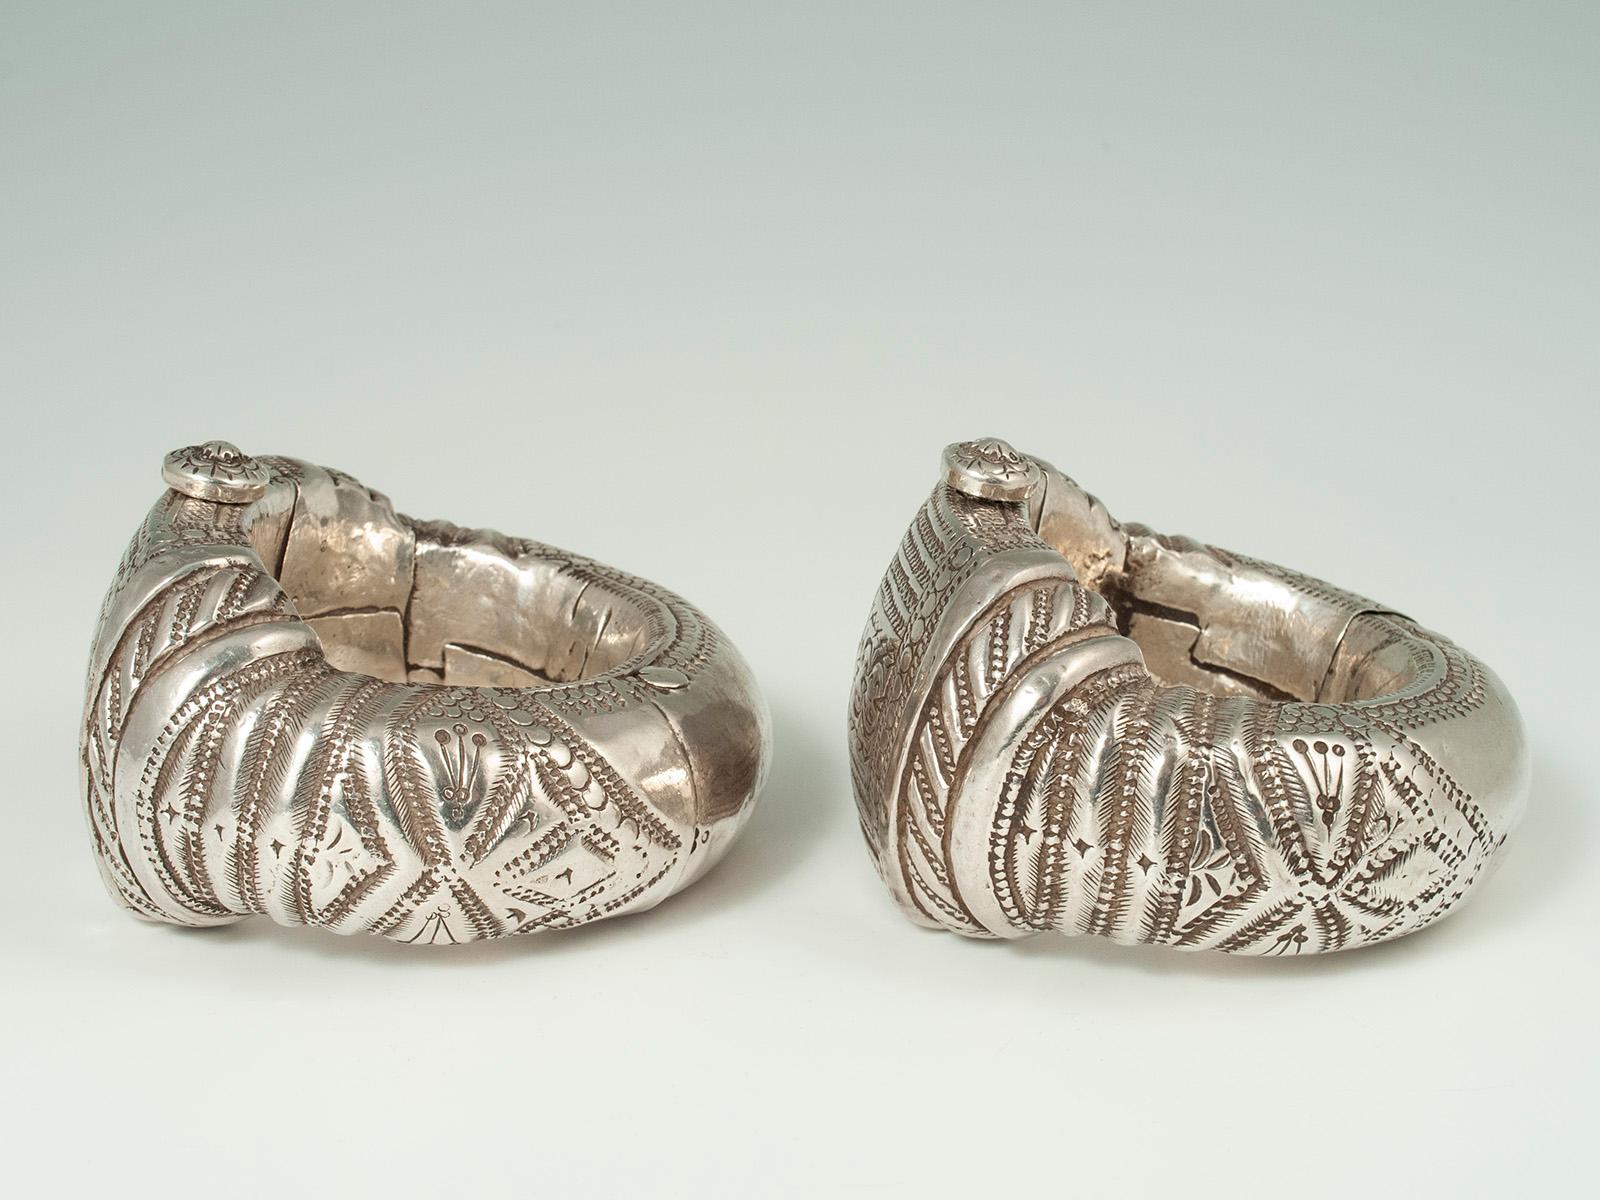 Hand-Crafted Late 19th to Early 20th Century Silver Anklets, Oman